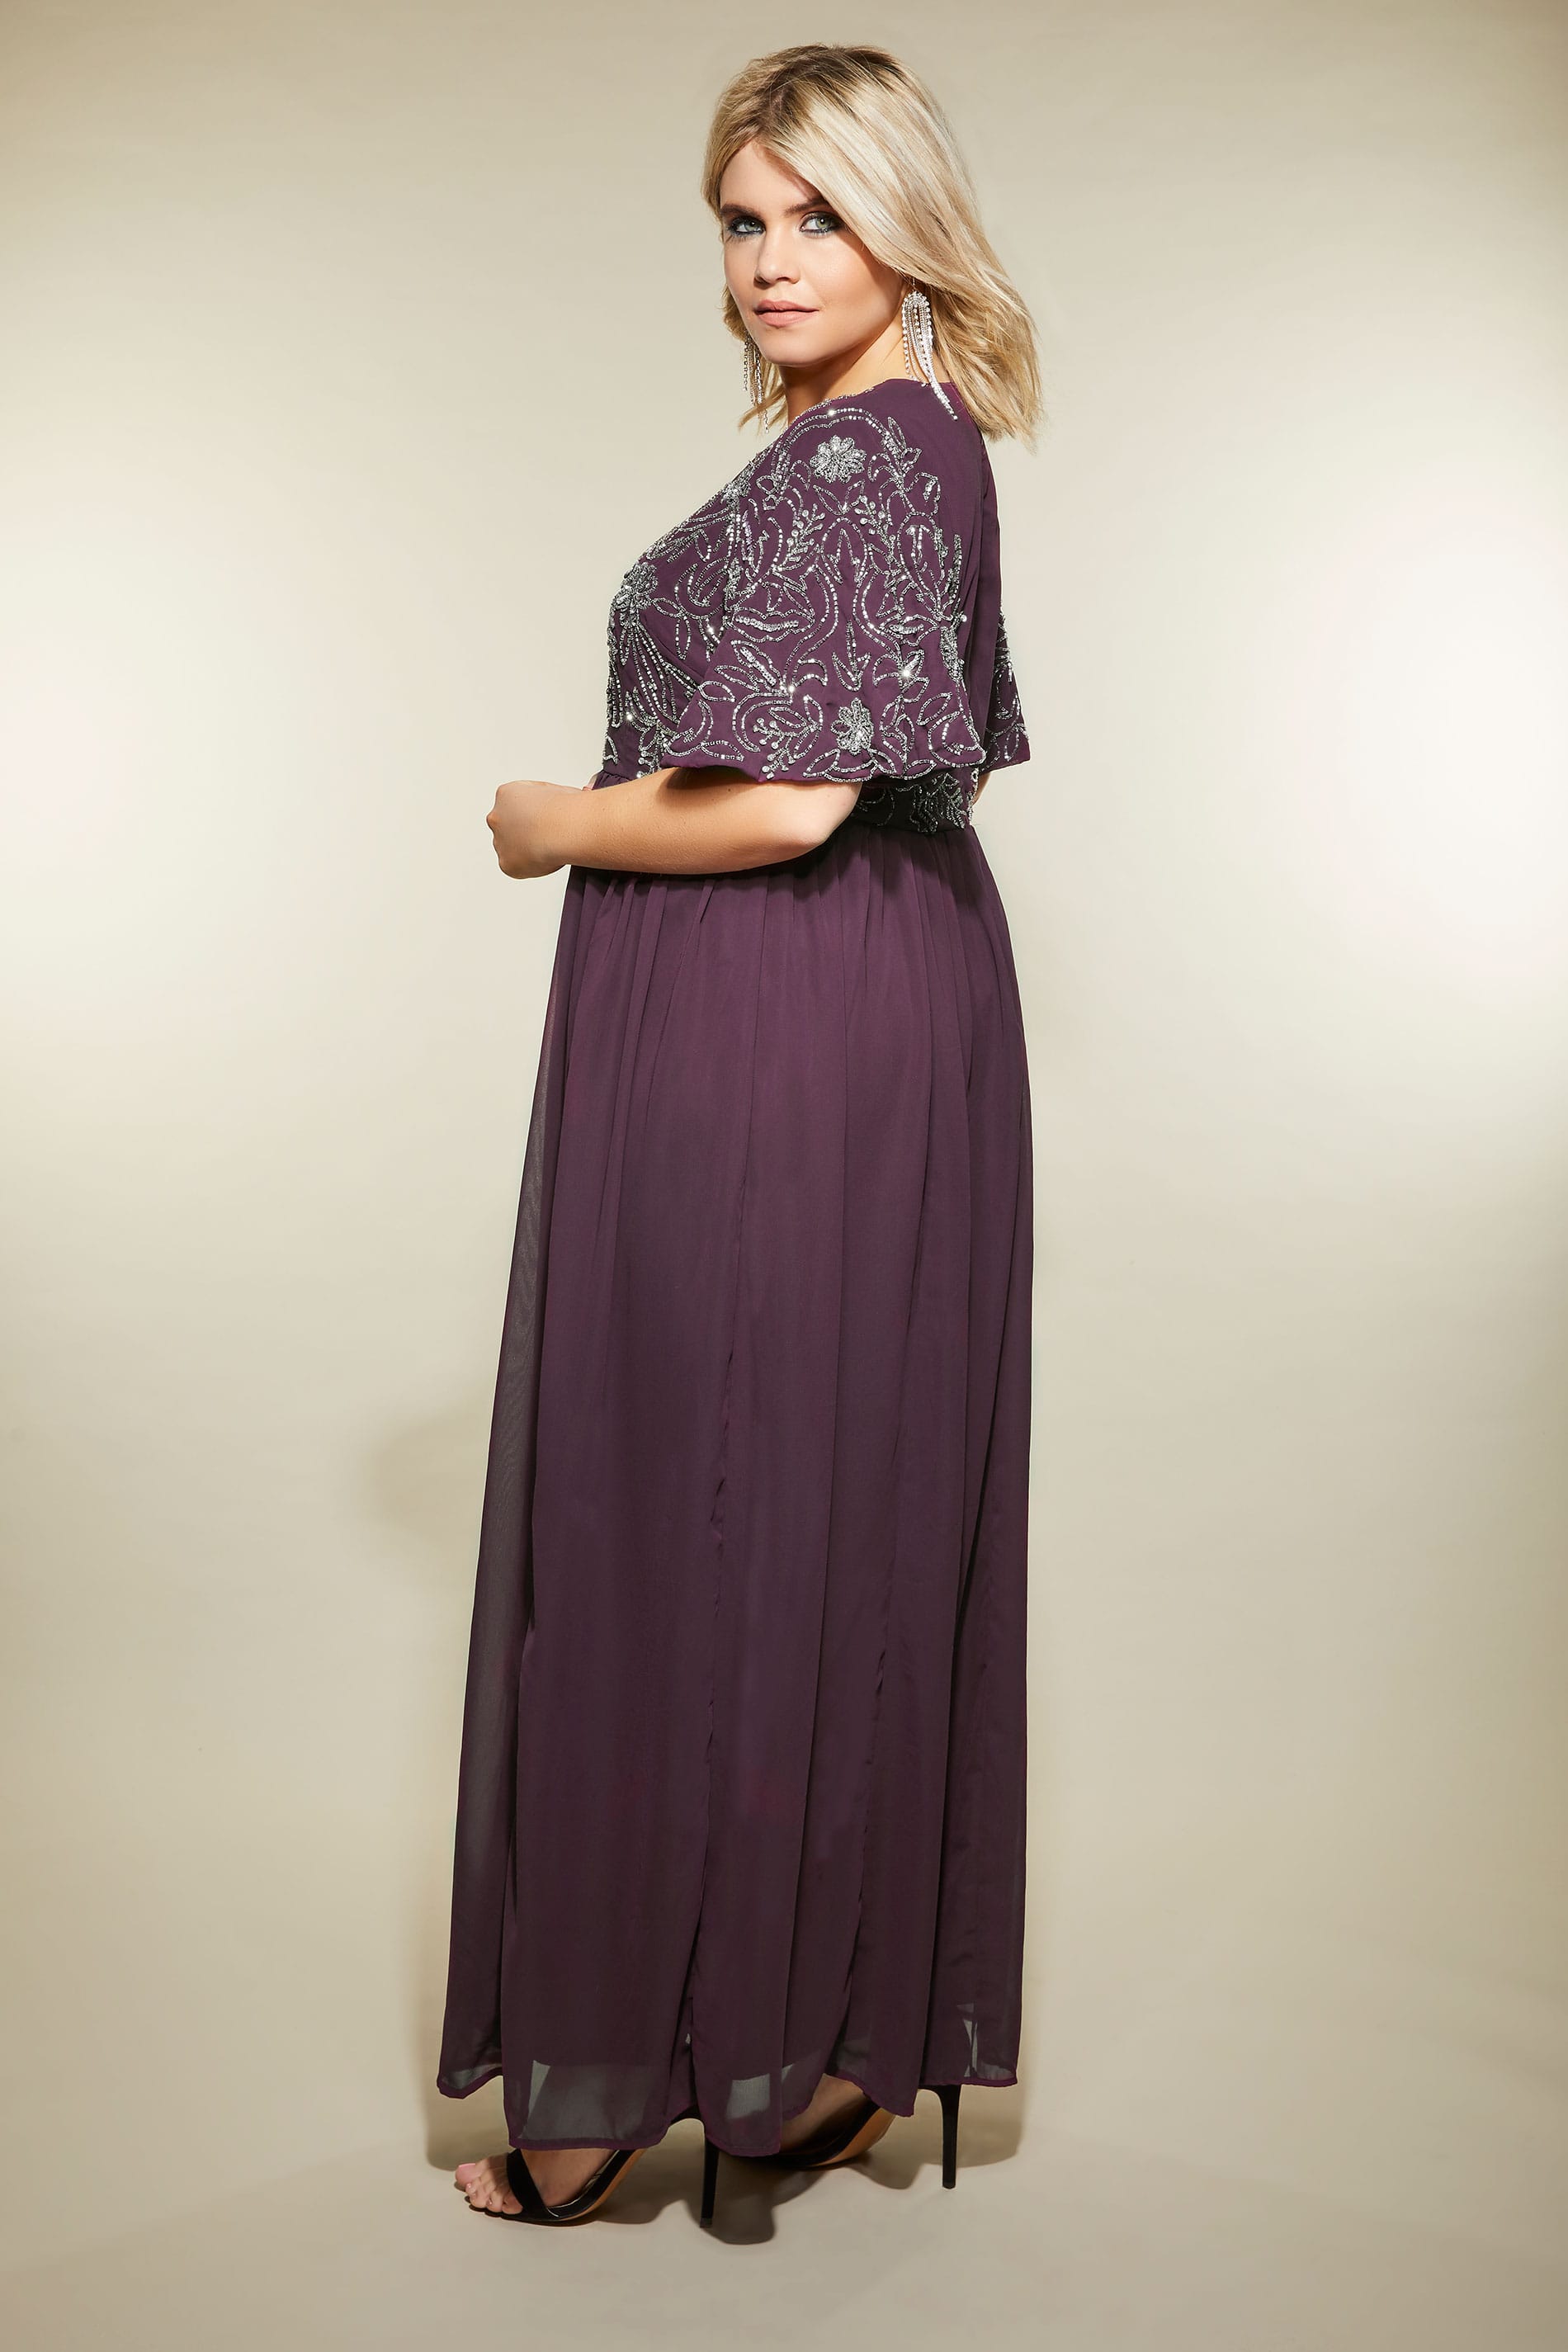 LUXE Purple Embellished Maxi Dress, Plus size 16 to 32 | Yours Clothing